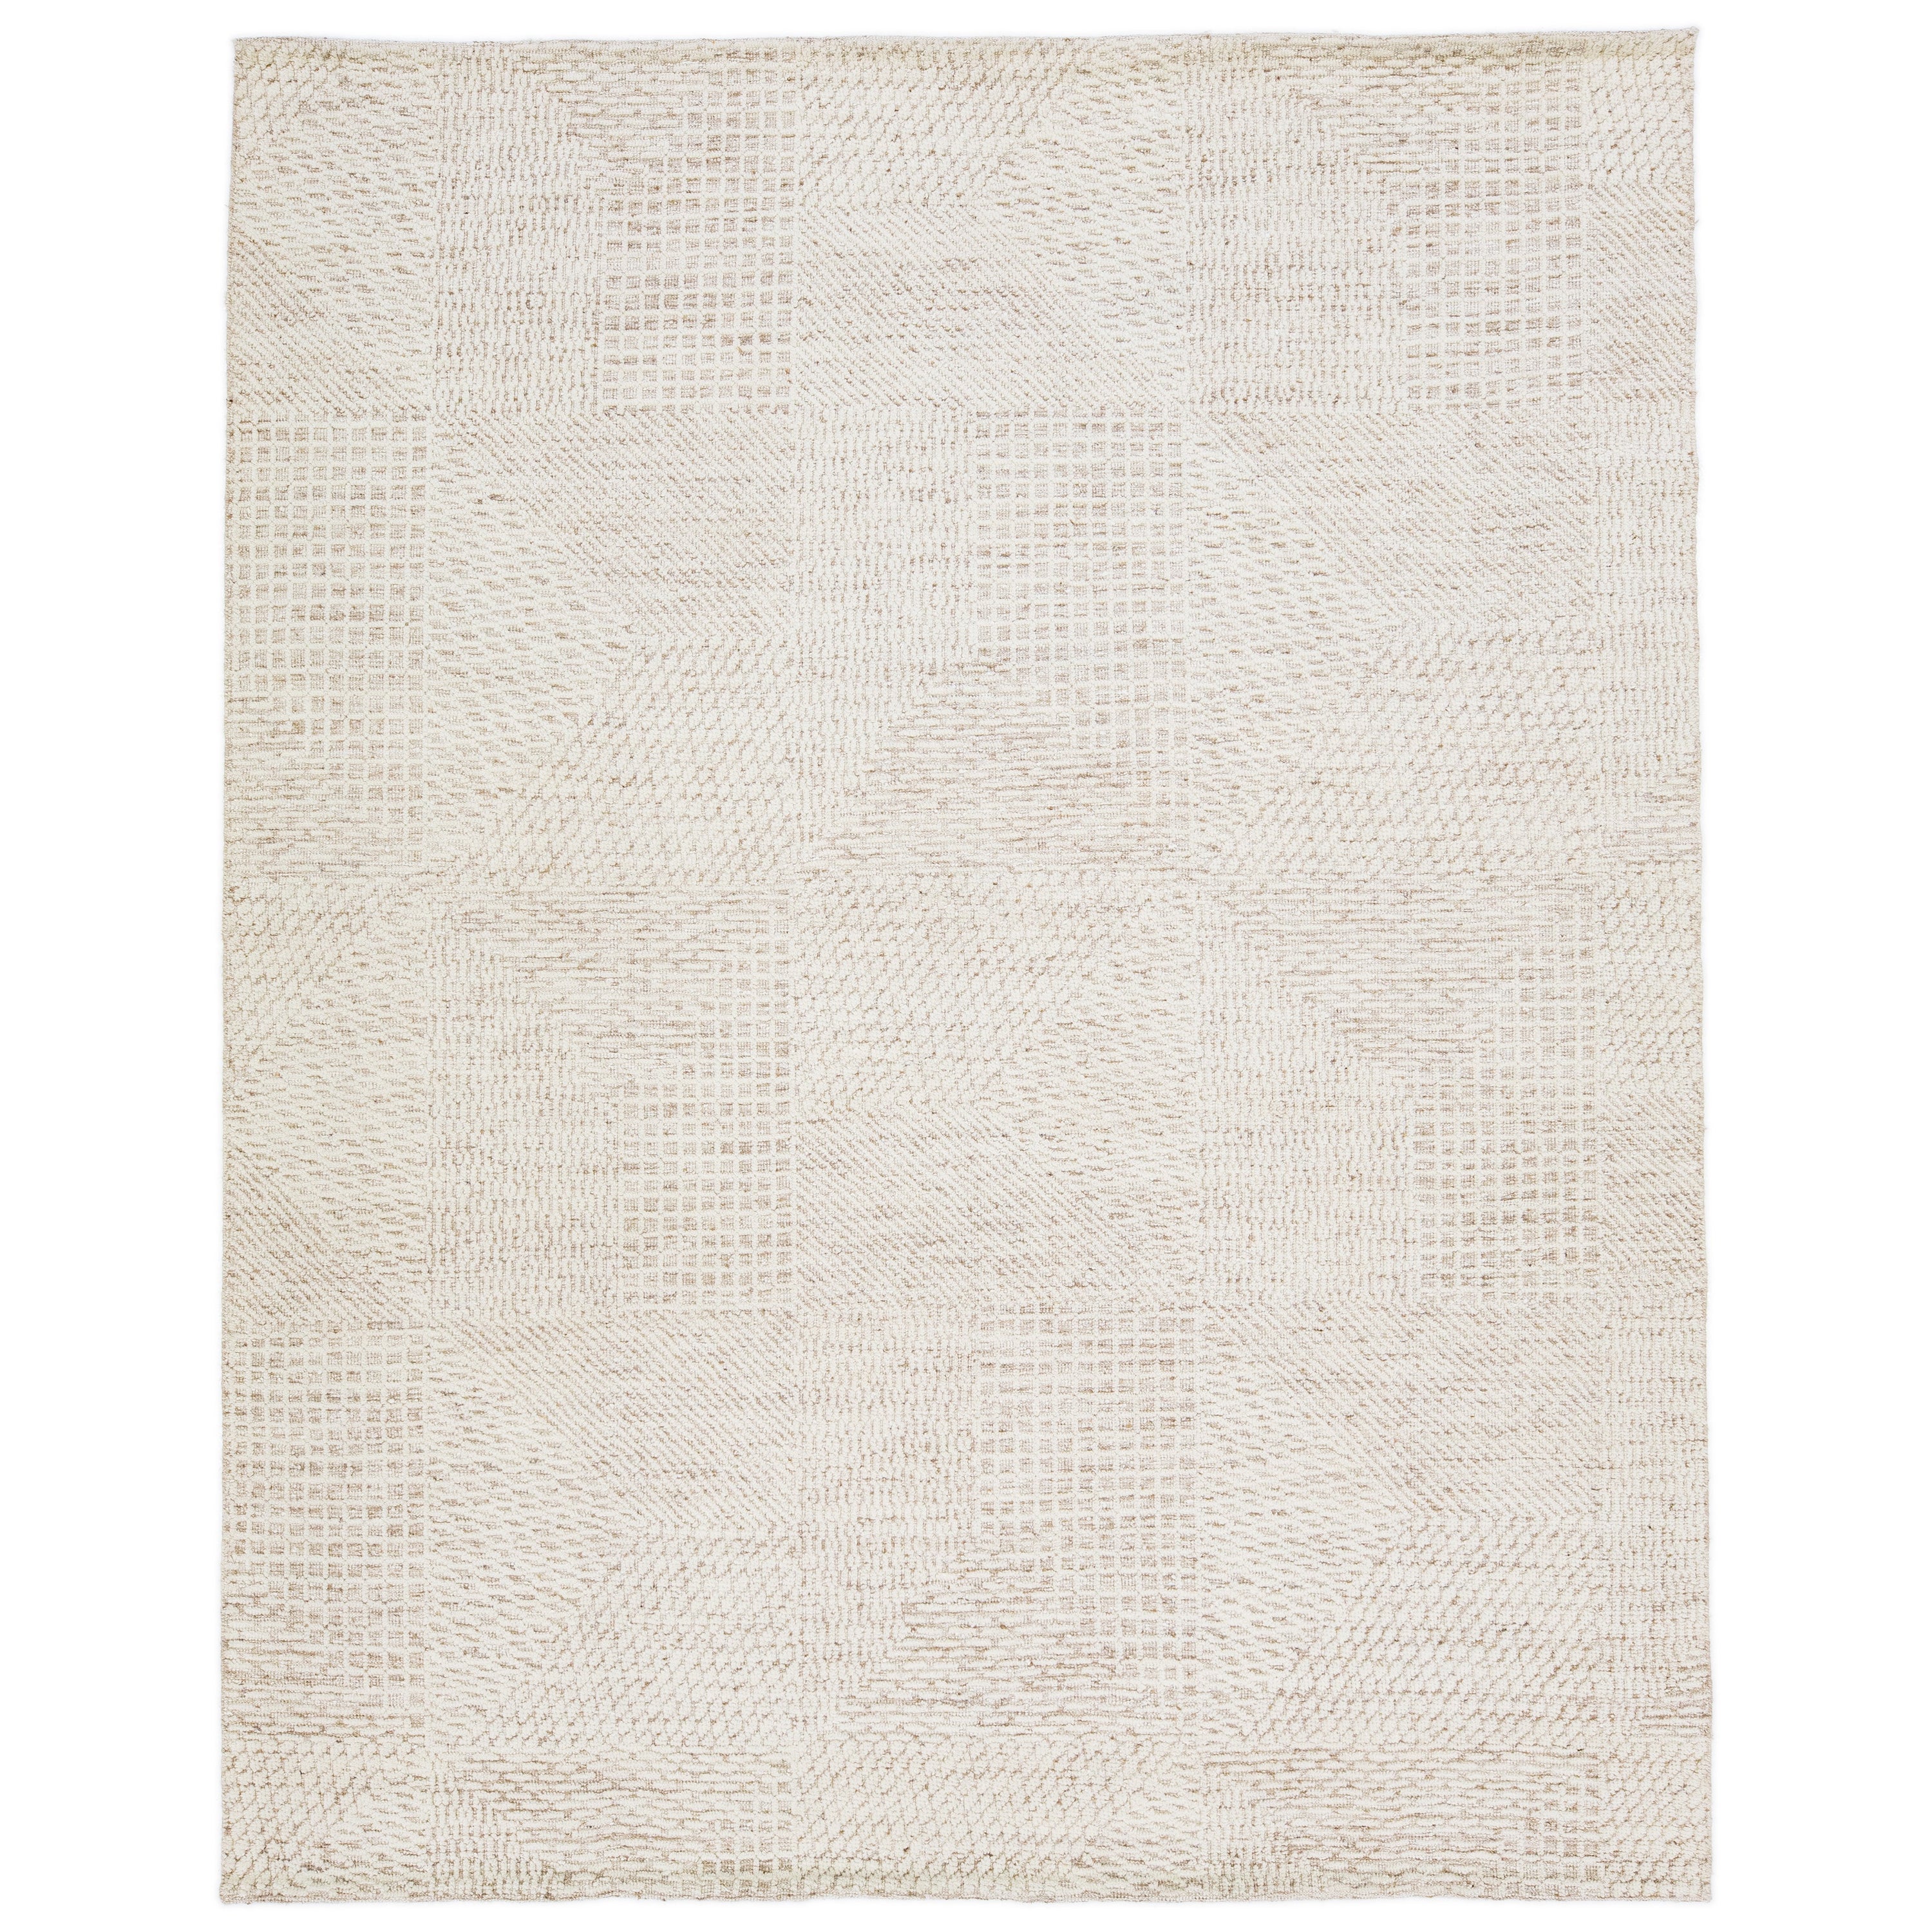 Natural Beige Modern Wool Rug Moroccan Style with Abstract Motif